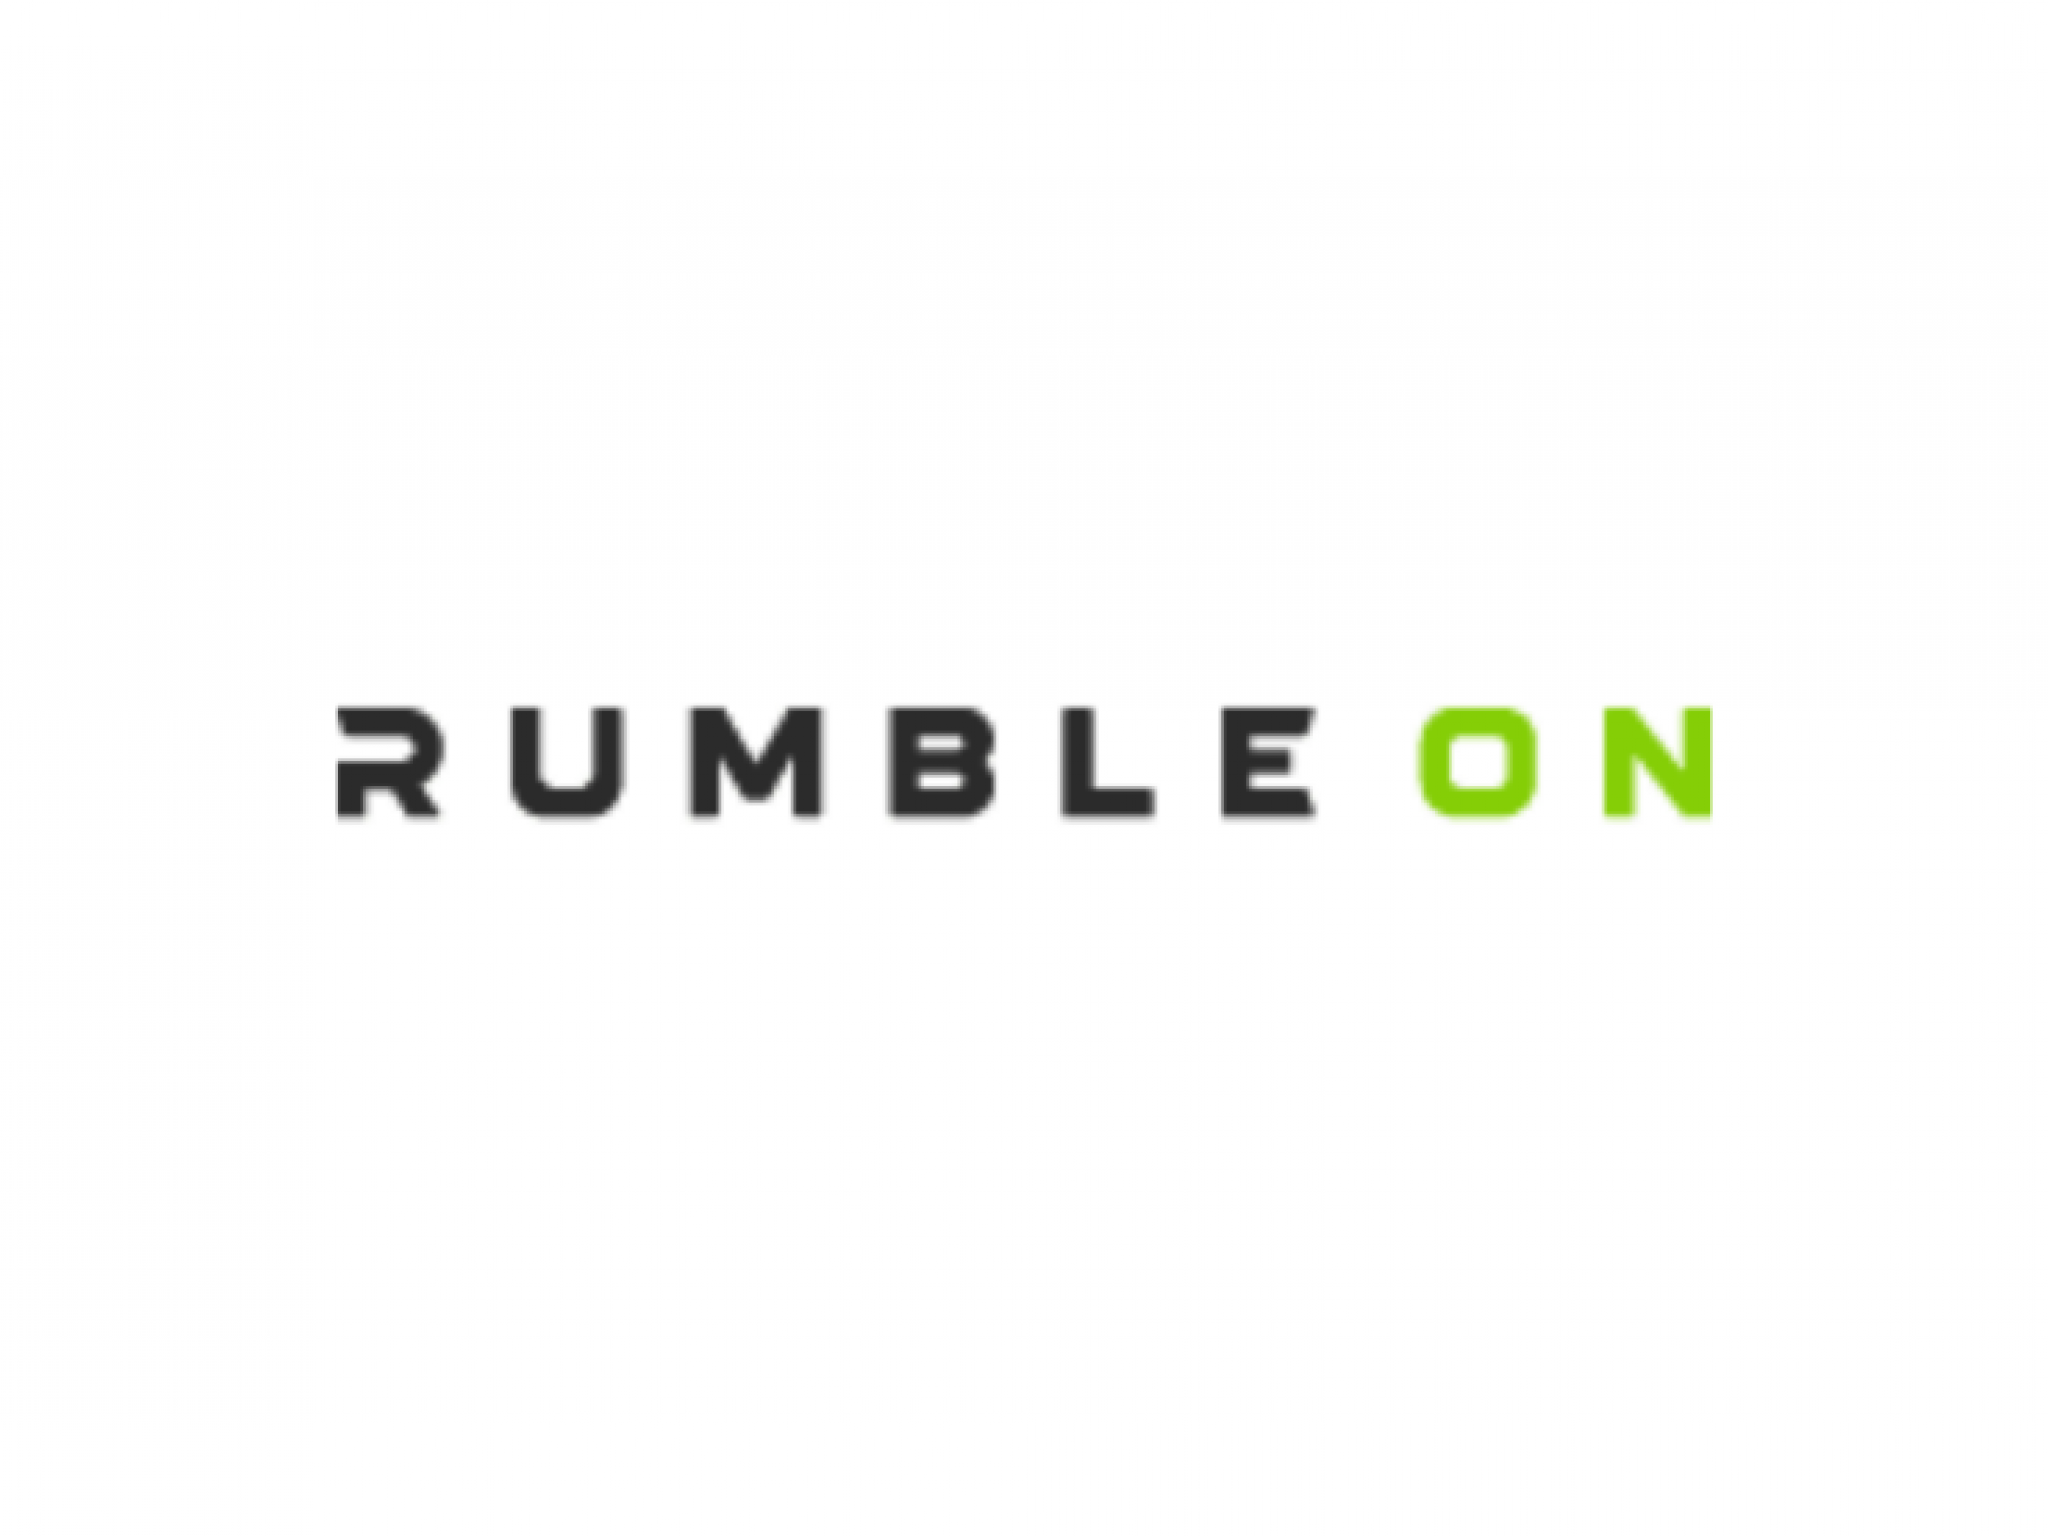  rumbleons-demand-picture-still-challenged-says-analyst 